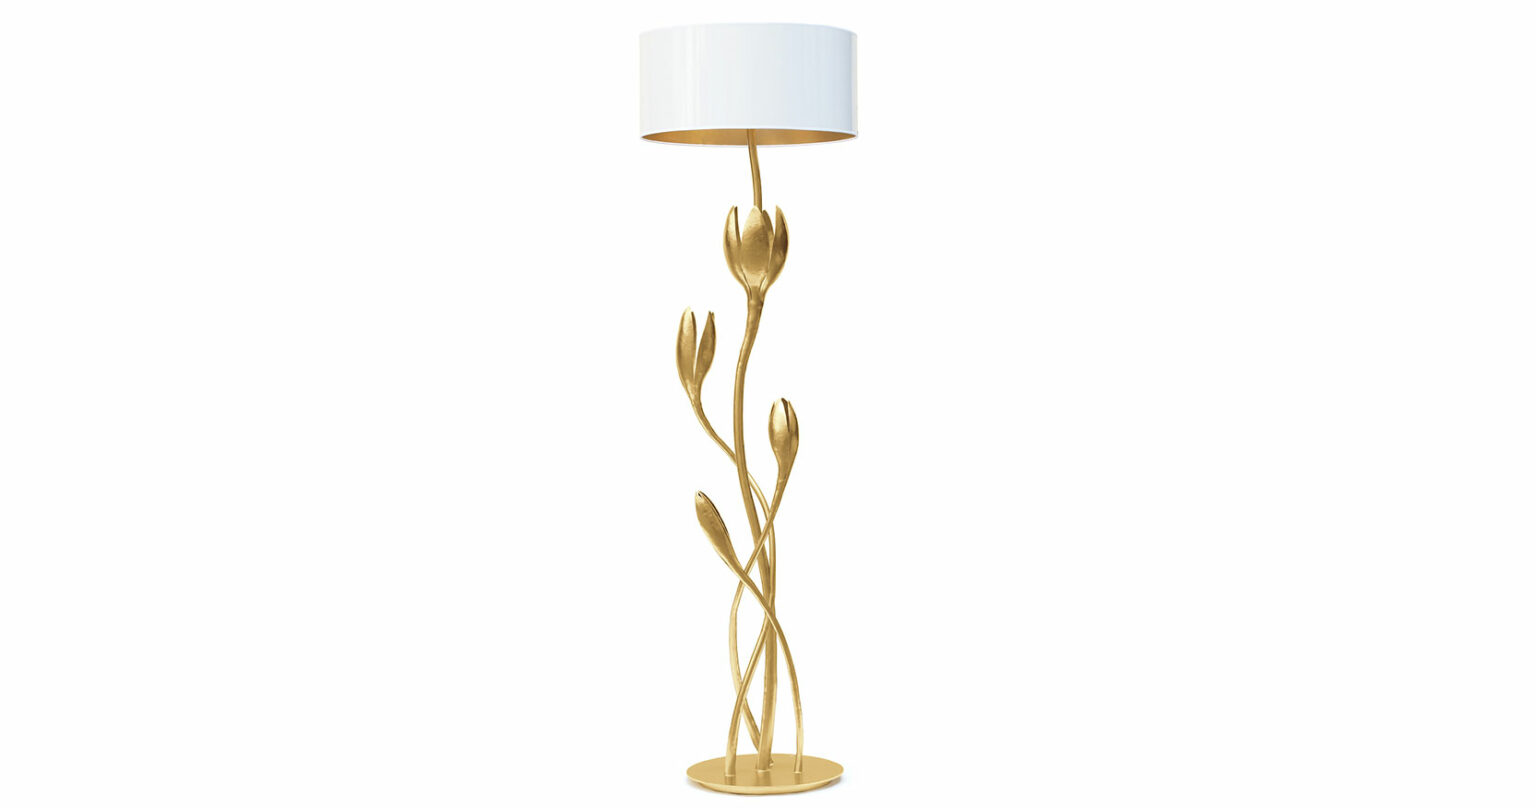 Eric Robin, spectacular sculptural floor lamp, with a round base in gilded wrought iron and stems of large stylized flowers, large oval white lampshade